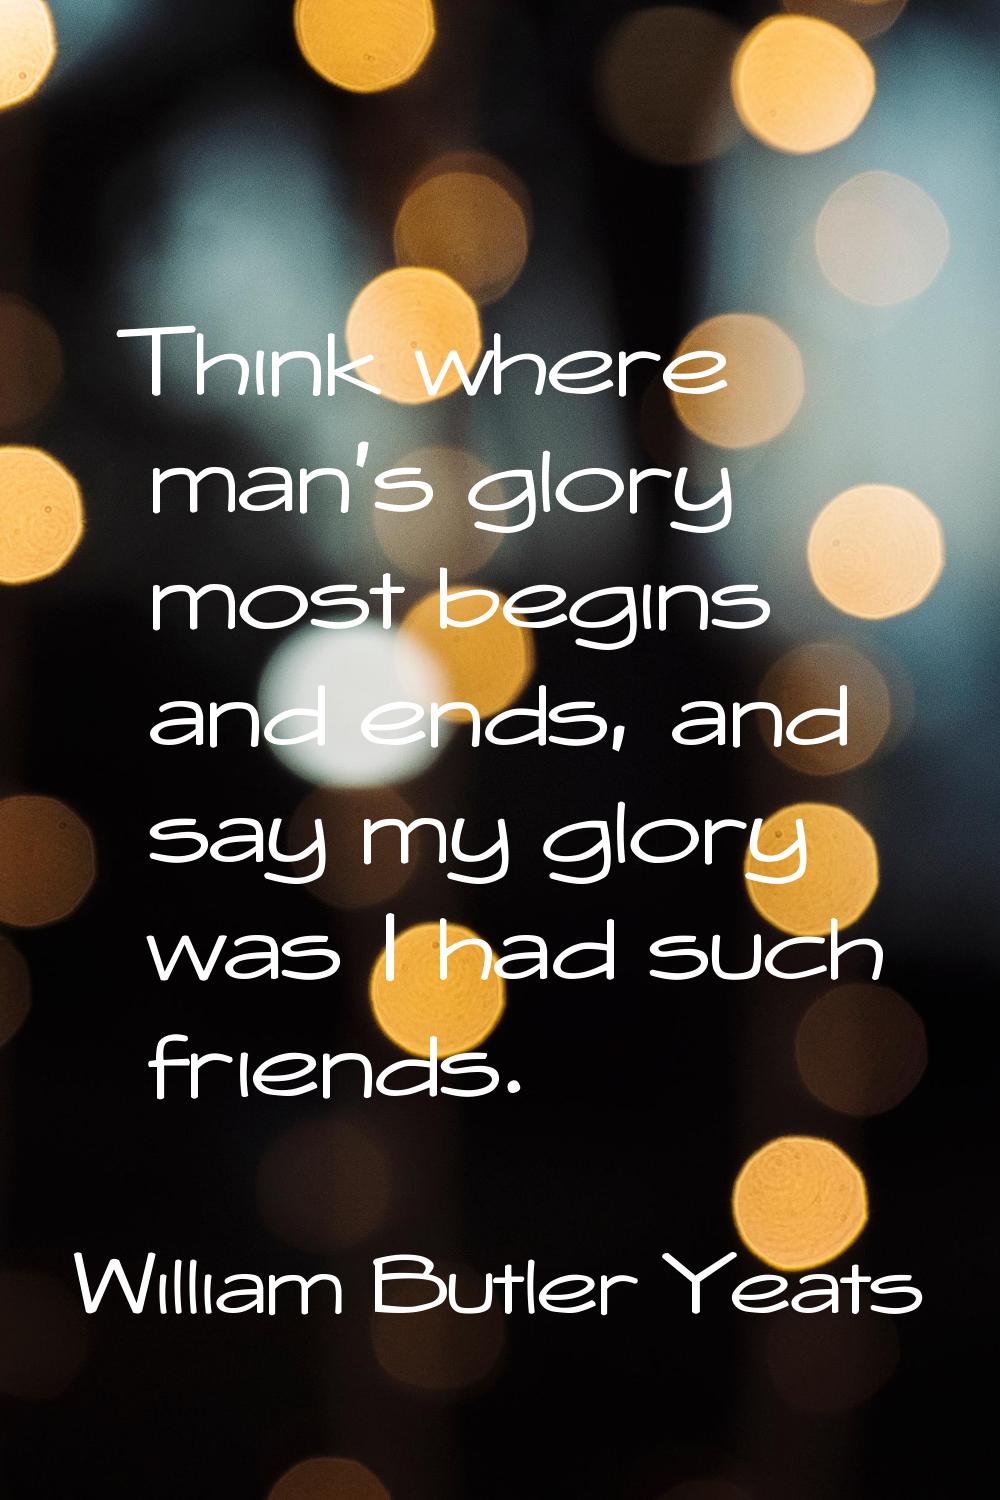 Think where man's glory most begins and ends, and say my glory was I had such friends.